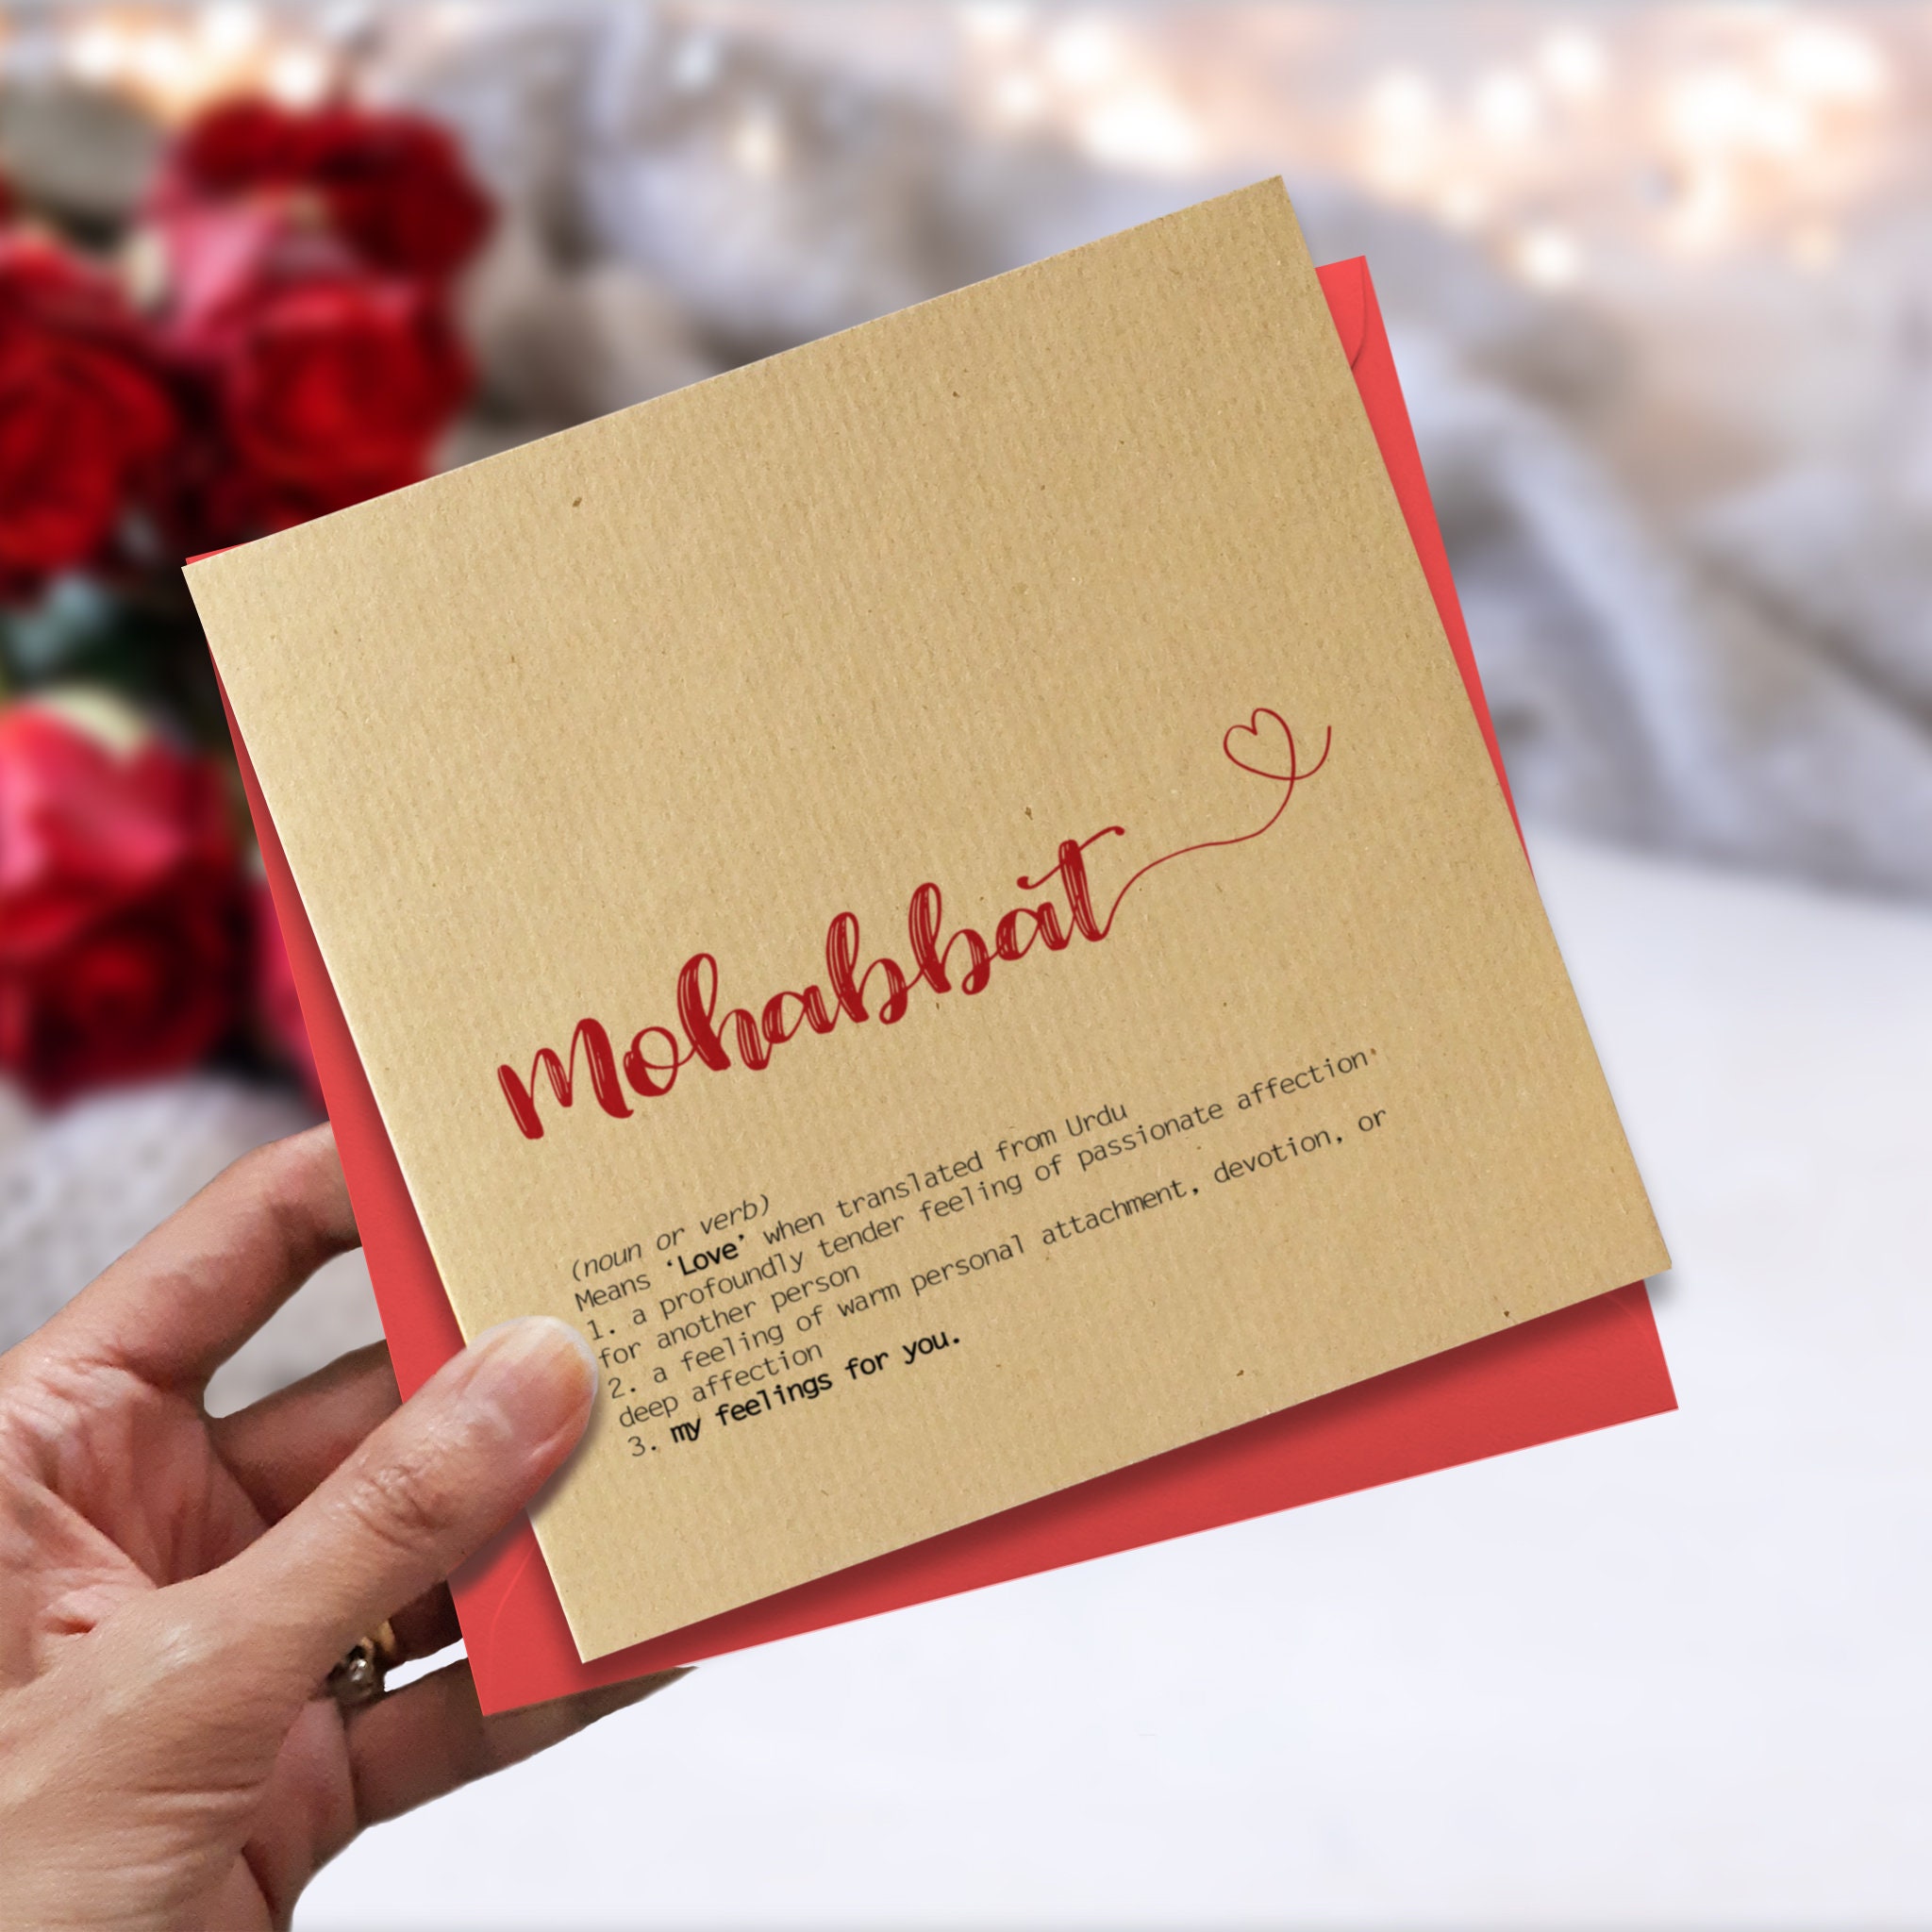 Anniversary Card Mohabbat Love Definition Meaning -  Israel